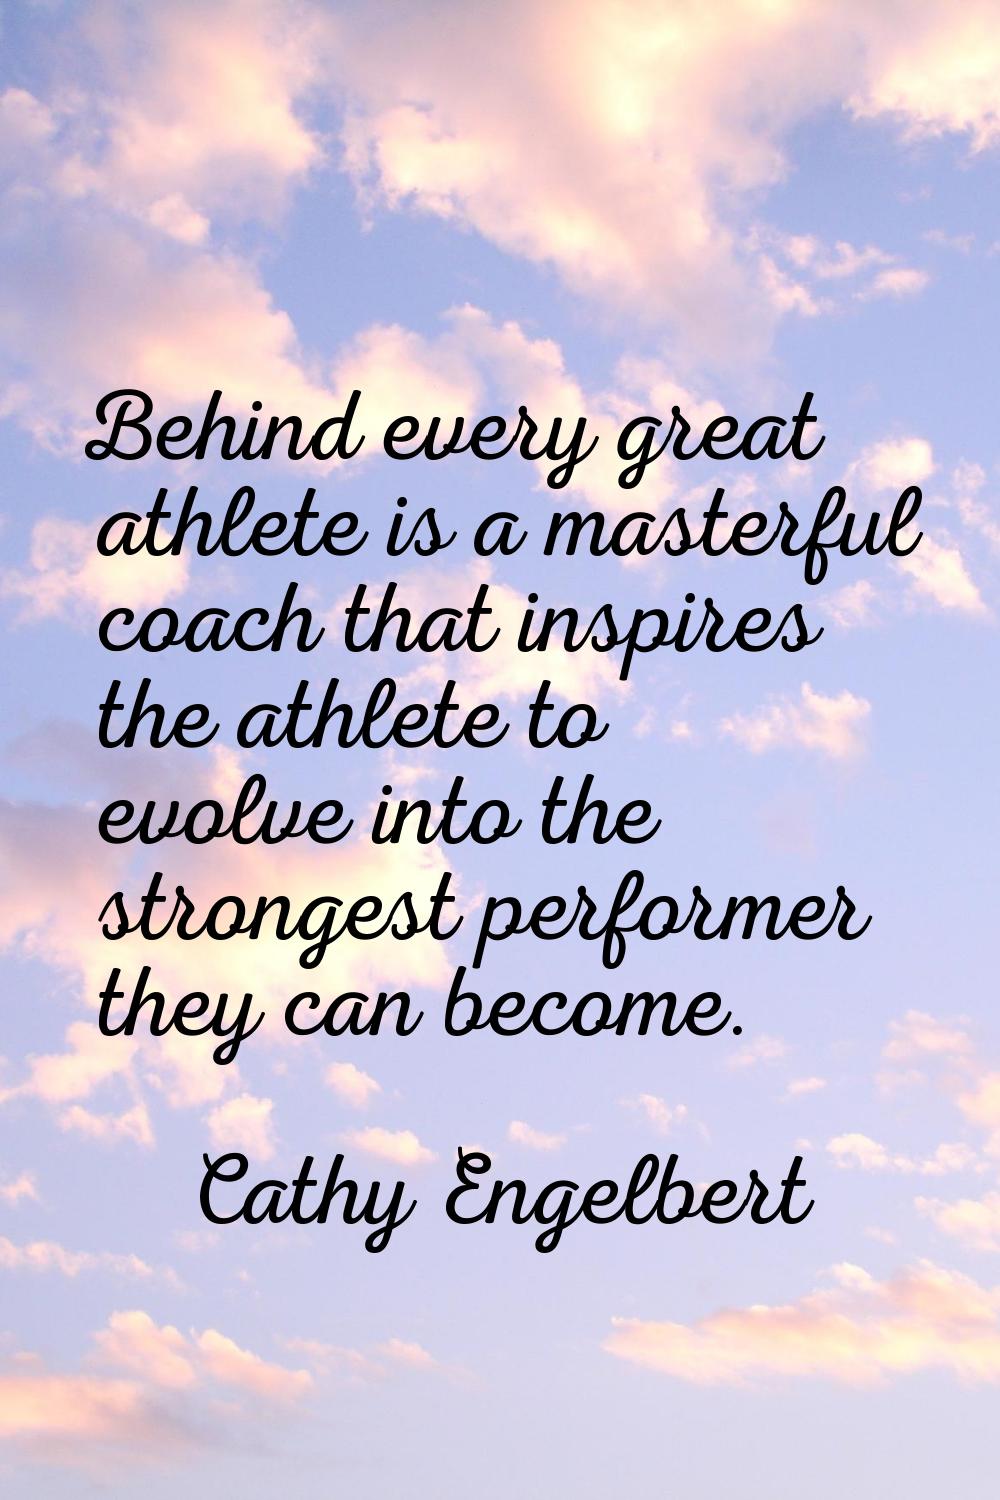 Behind every great athlete is a masterful coach that inspires the athlete to evolve into the strong